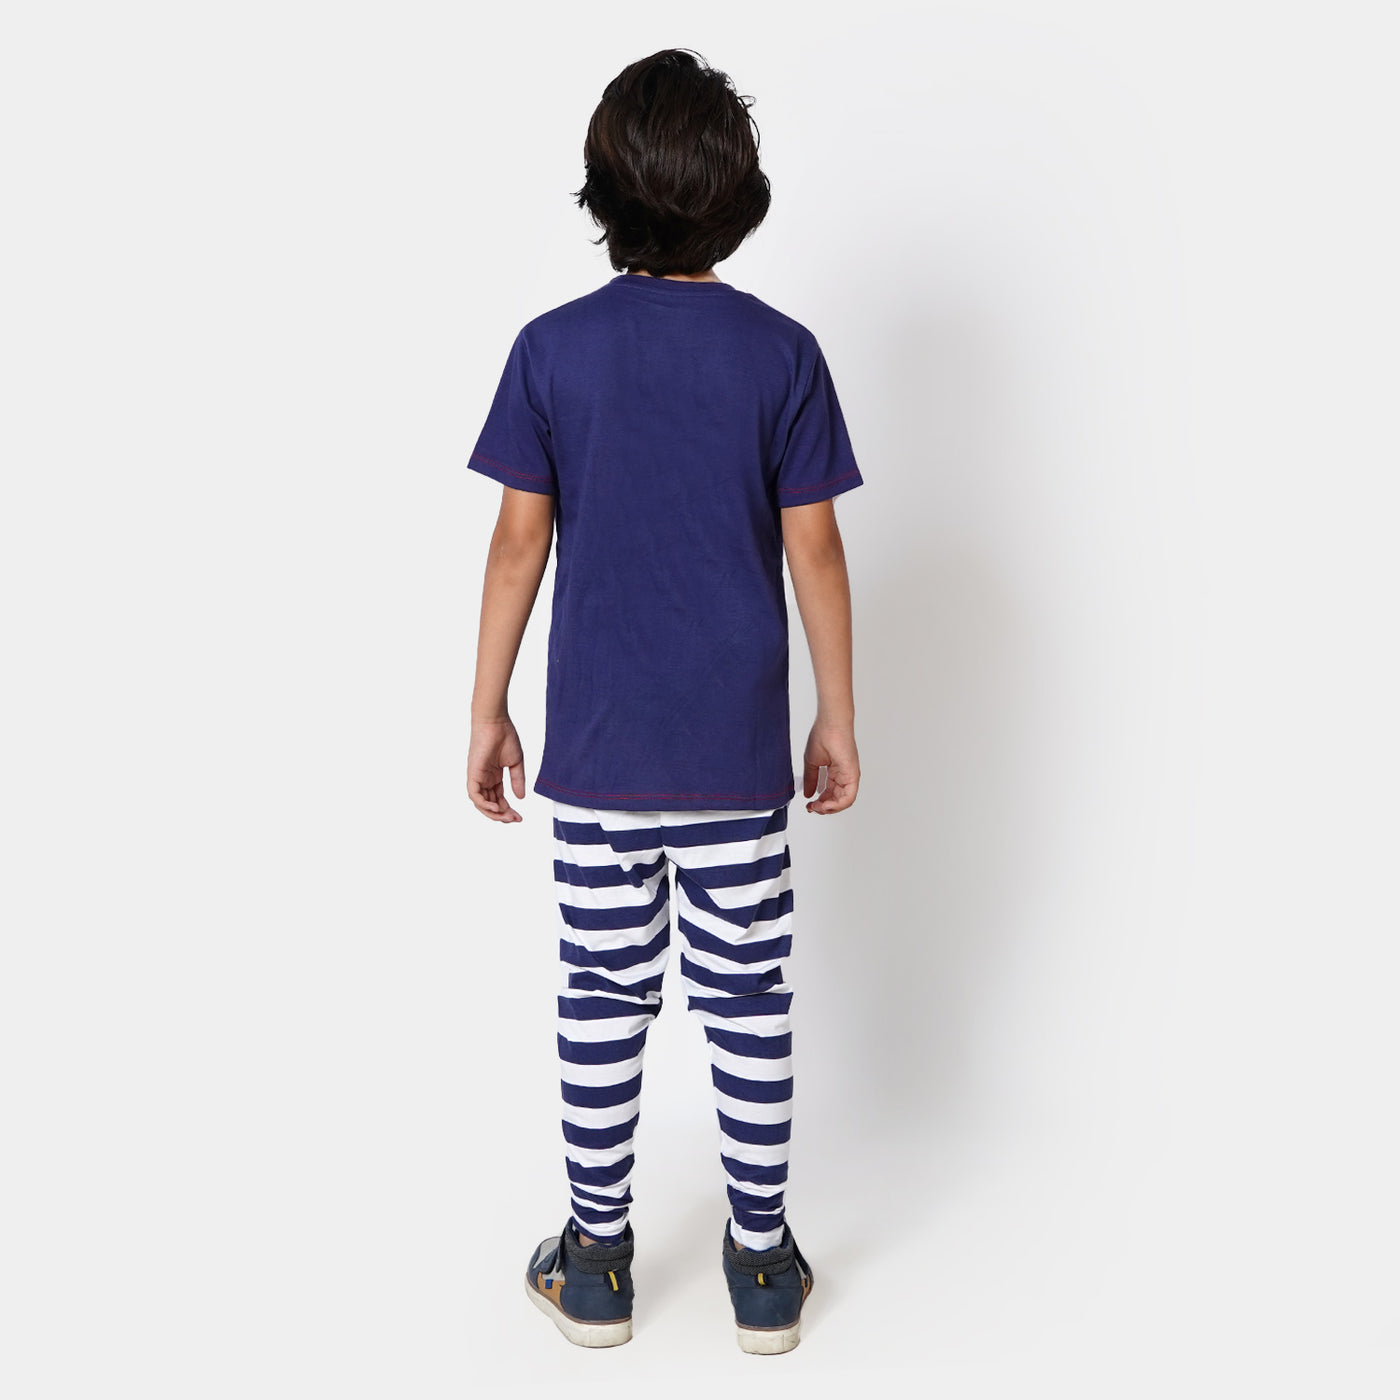 Boys Knitted NightWear Suit Action Hero - Navy Blue